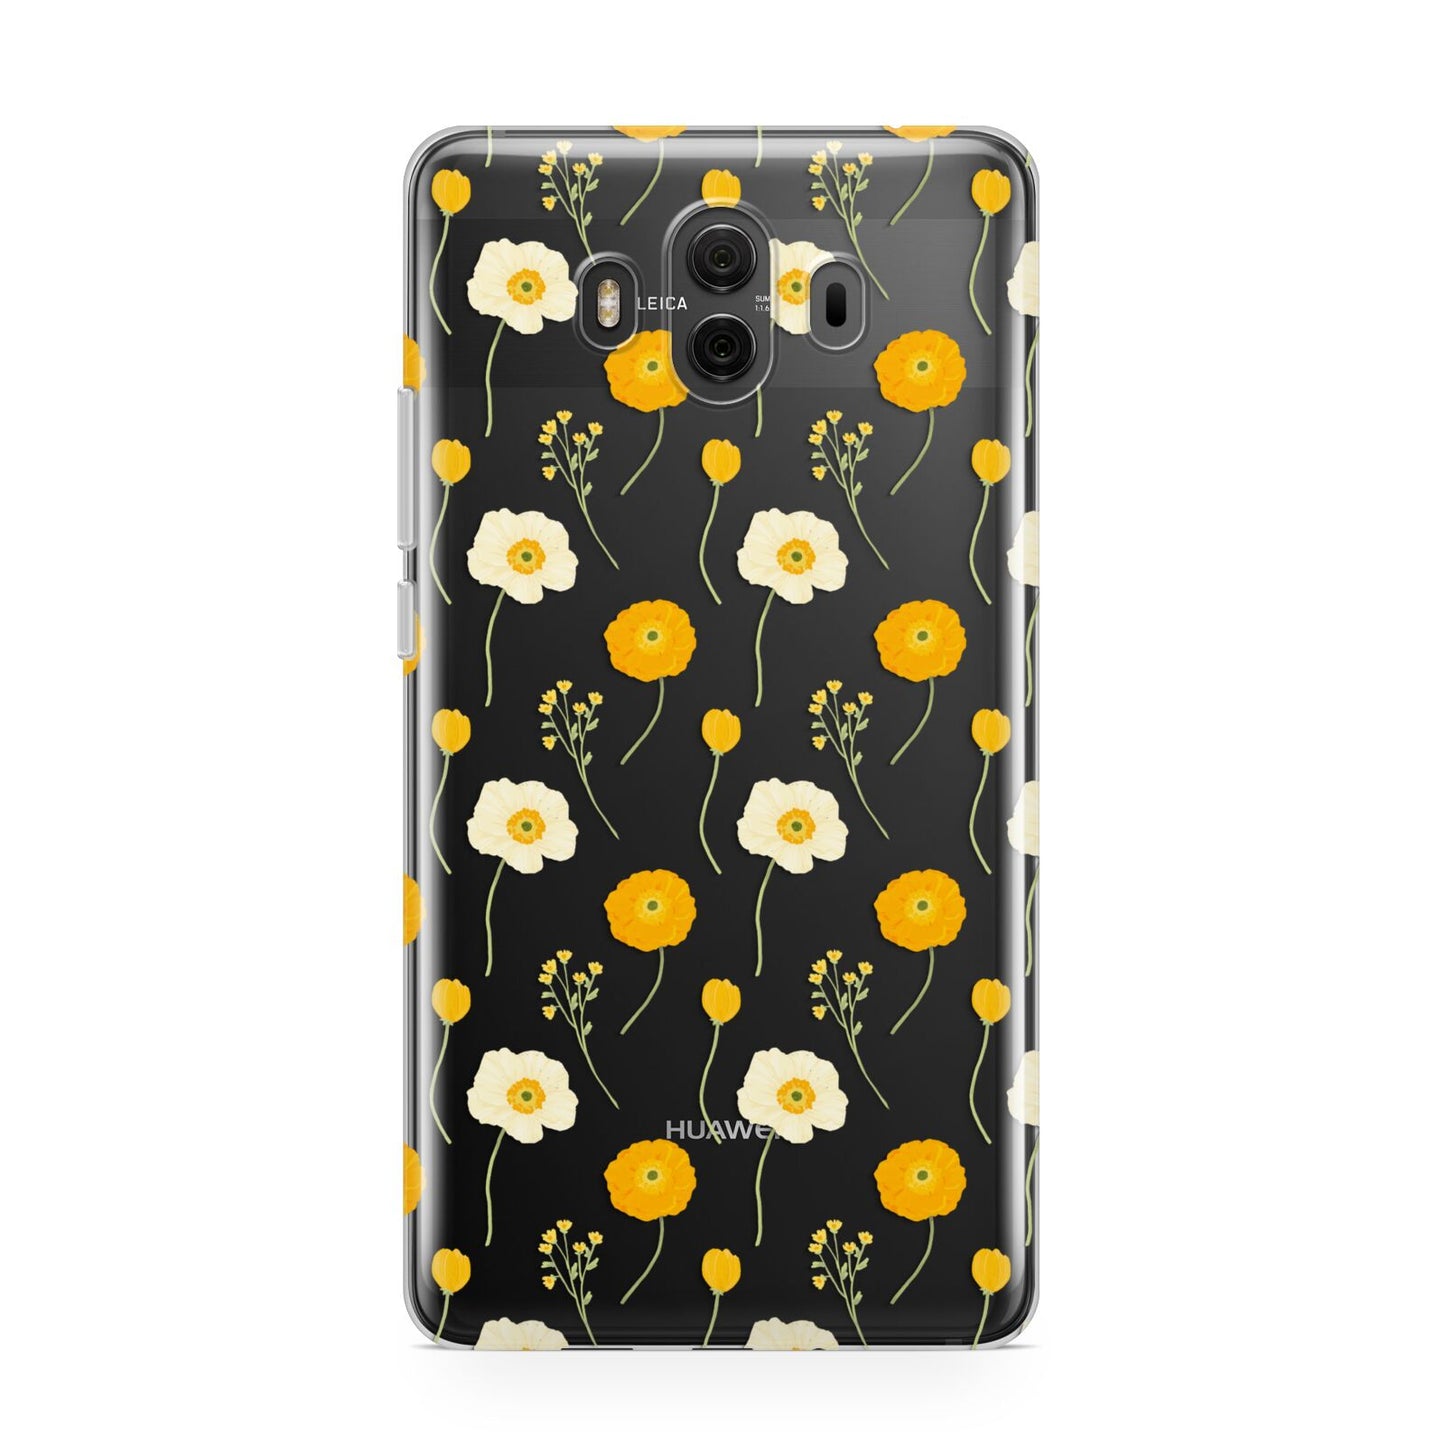 Wild Floral Huawei Mate 10 Protective Phone Case